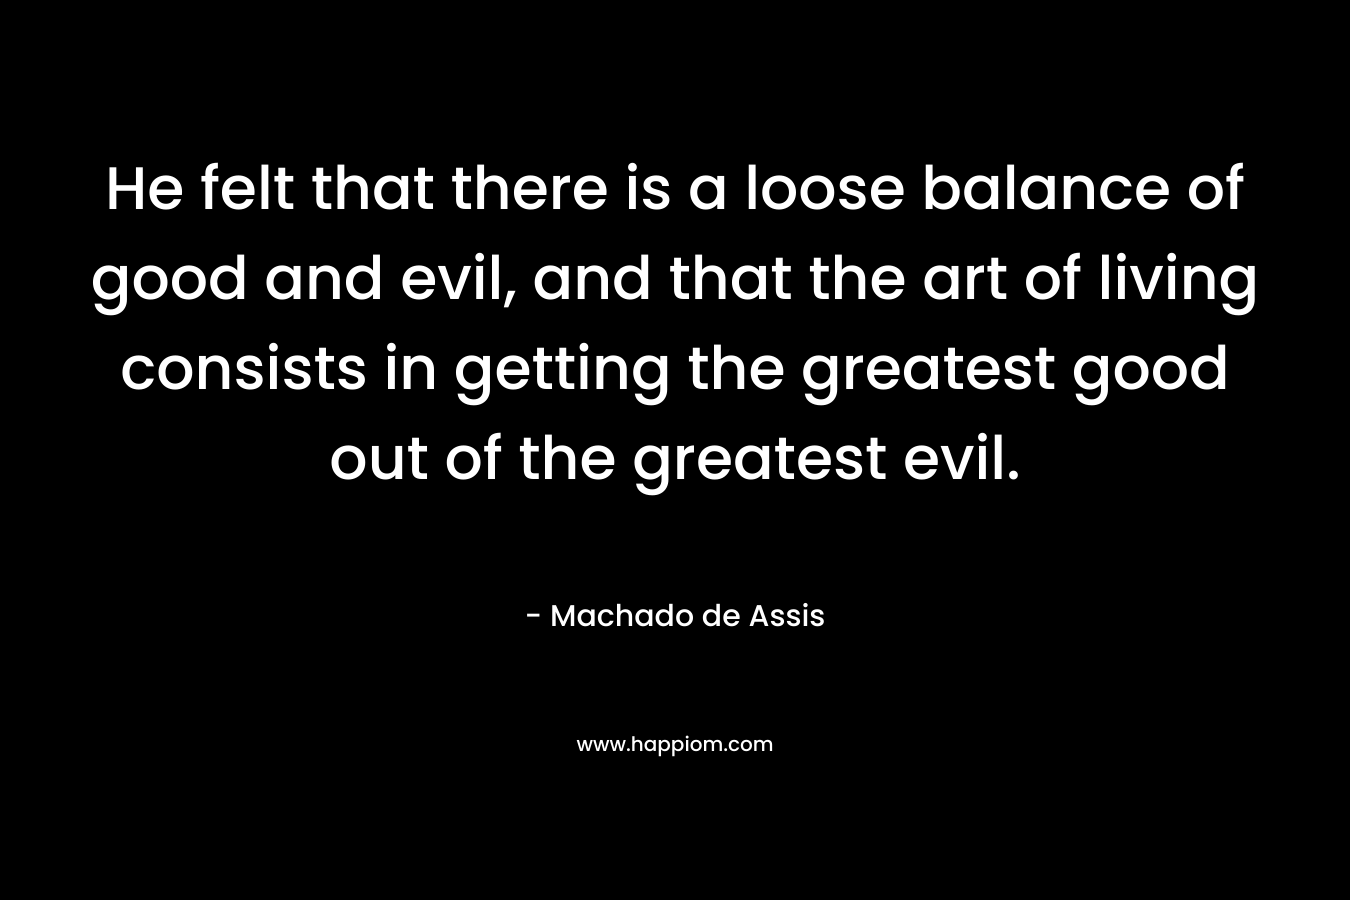 He felt that there is a loose balance of good and evil, and that the art of living consists in getting the greatest good out of the greatest evil. – Machado de Assis